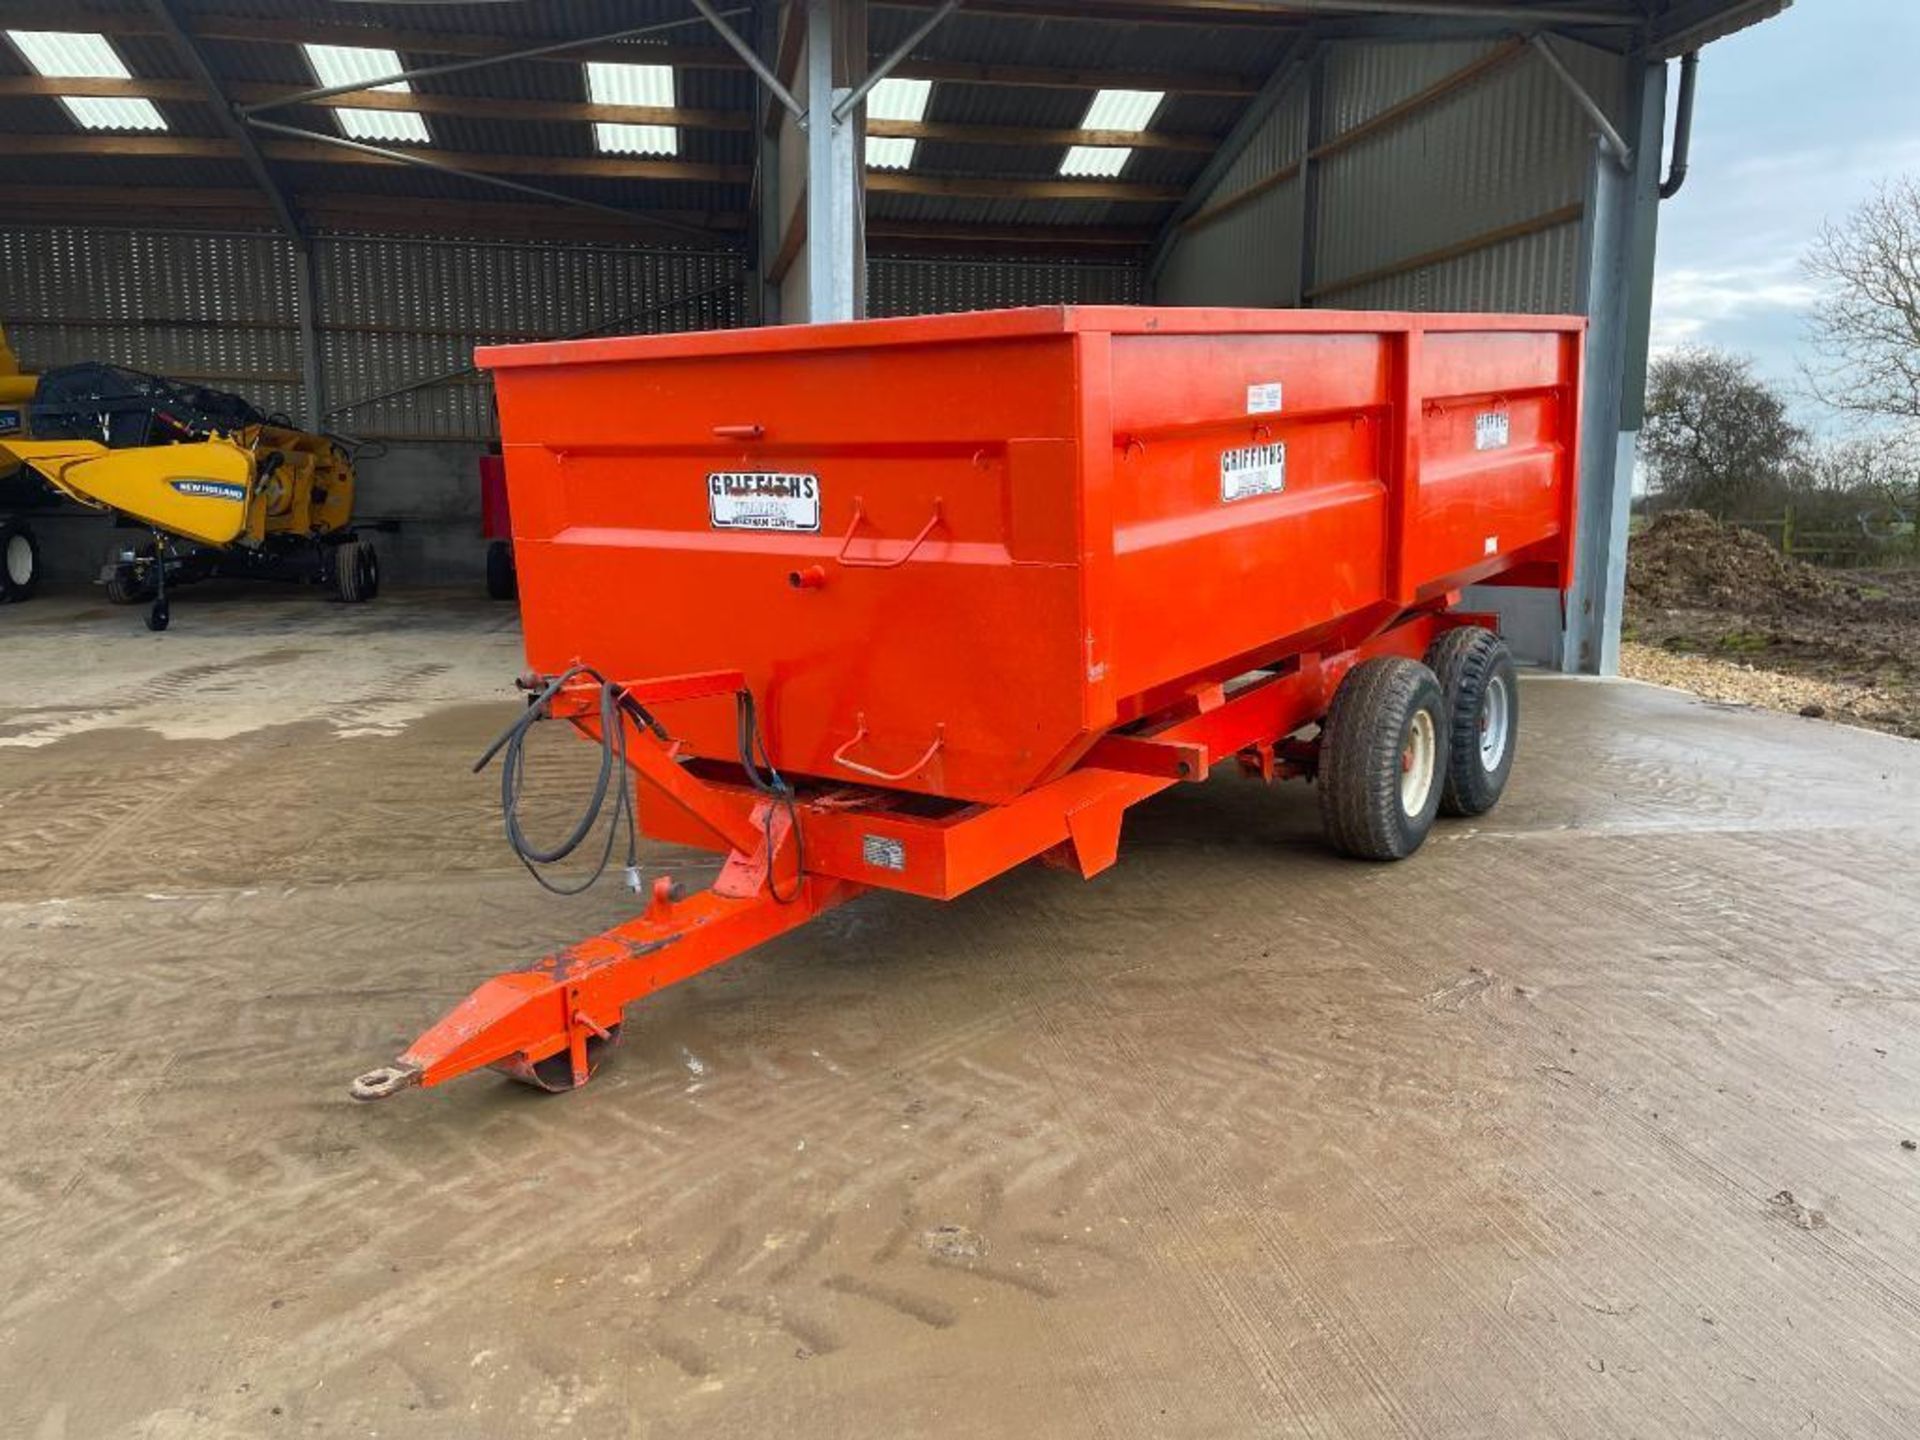 1984 Griffiths GT80 10t twin axle hydraulic tipping grain trailer with manual tailgate and grain chu - Image 4 of 15